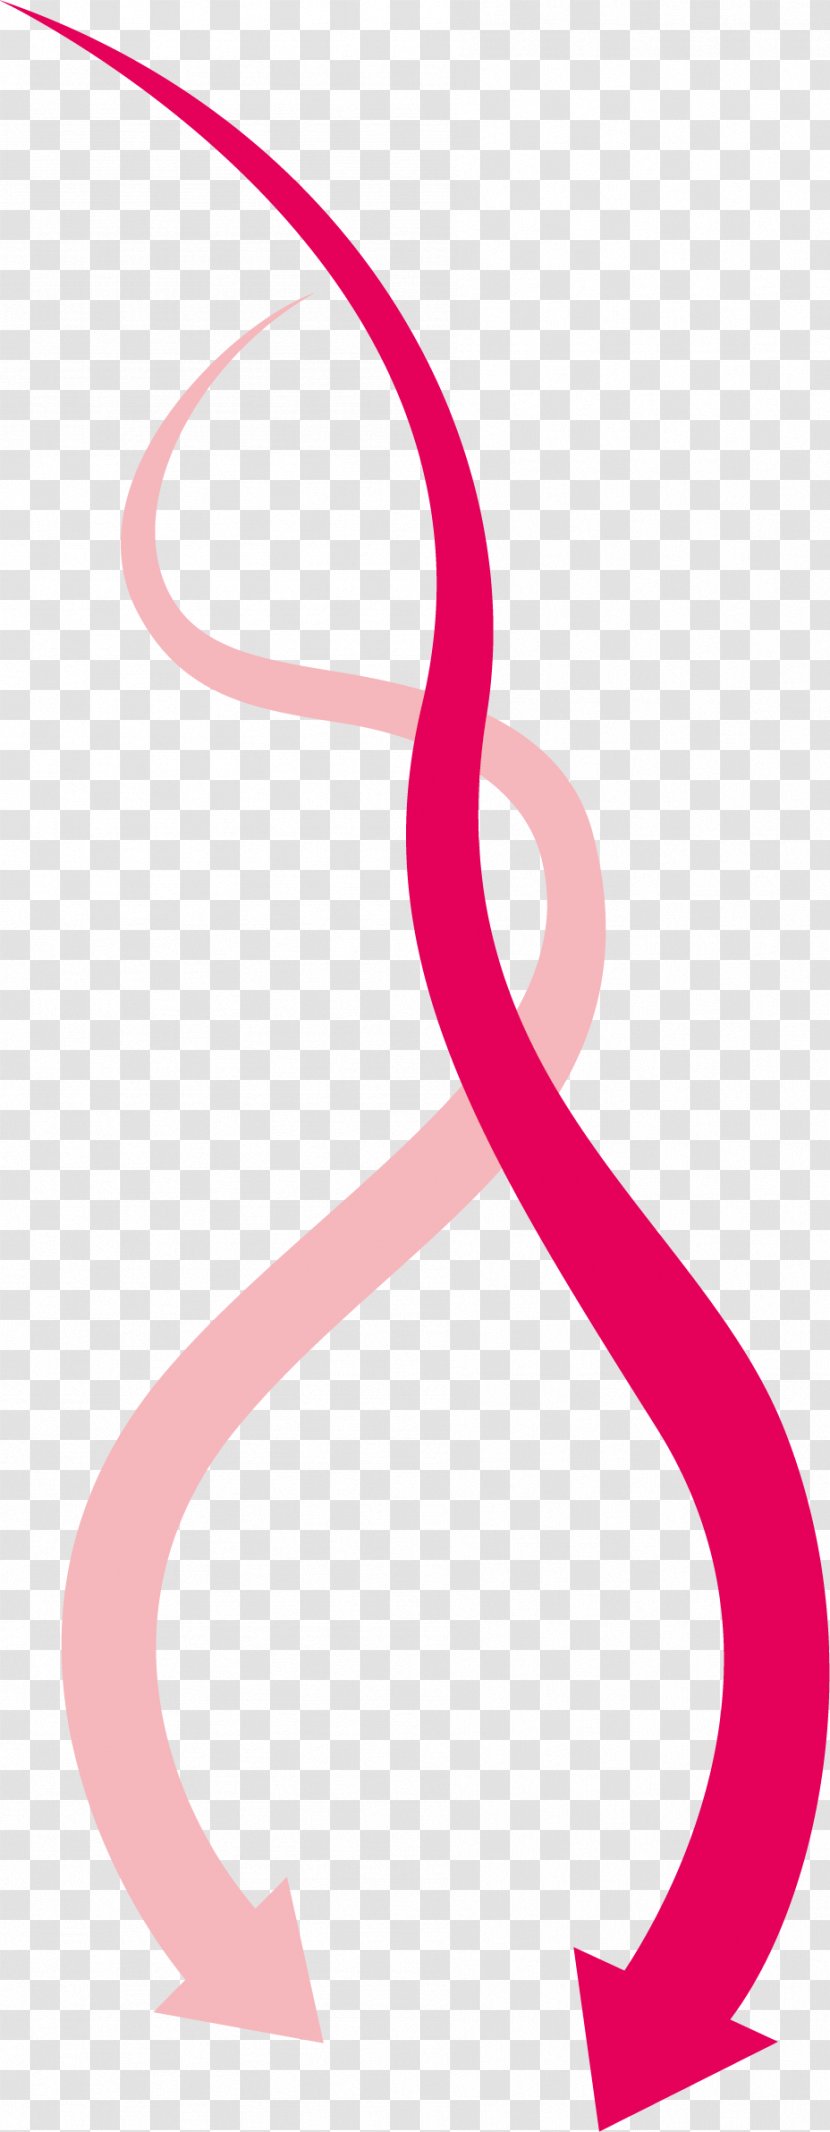 Arrow Download - Curve - Curved Tool Transparent PNG